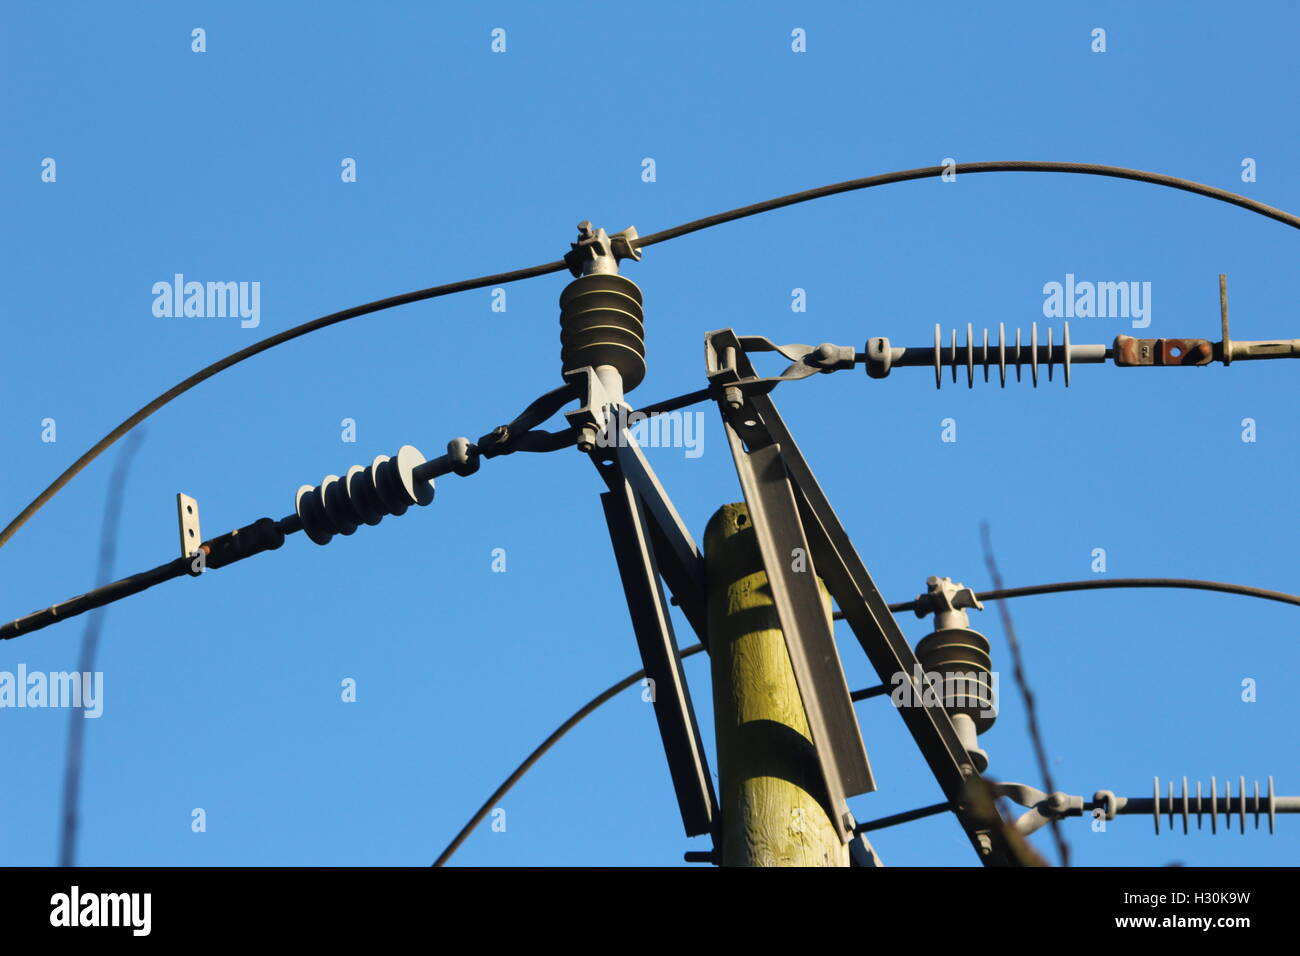 connection and insulation, electricity transmission. Stock Photo